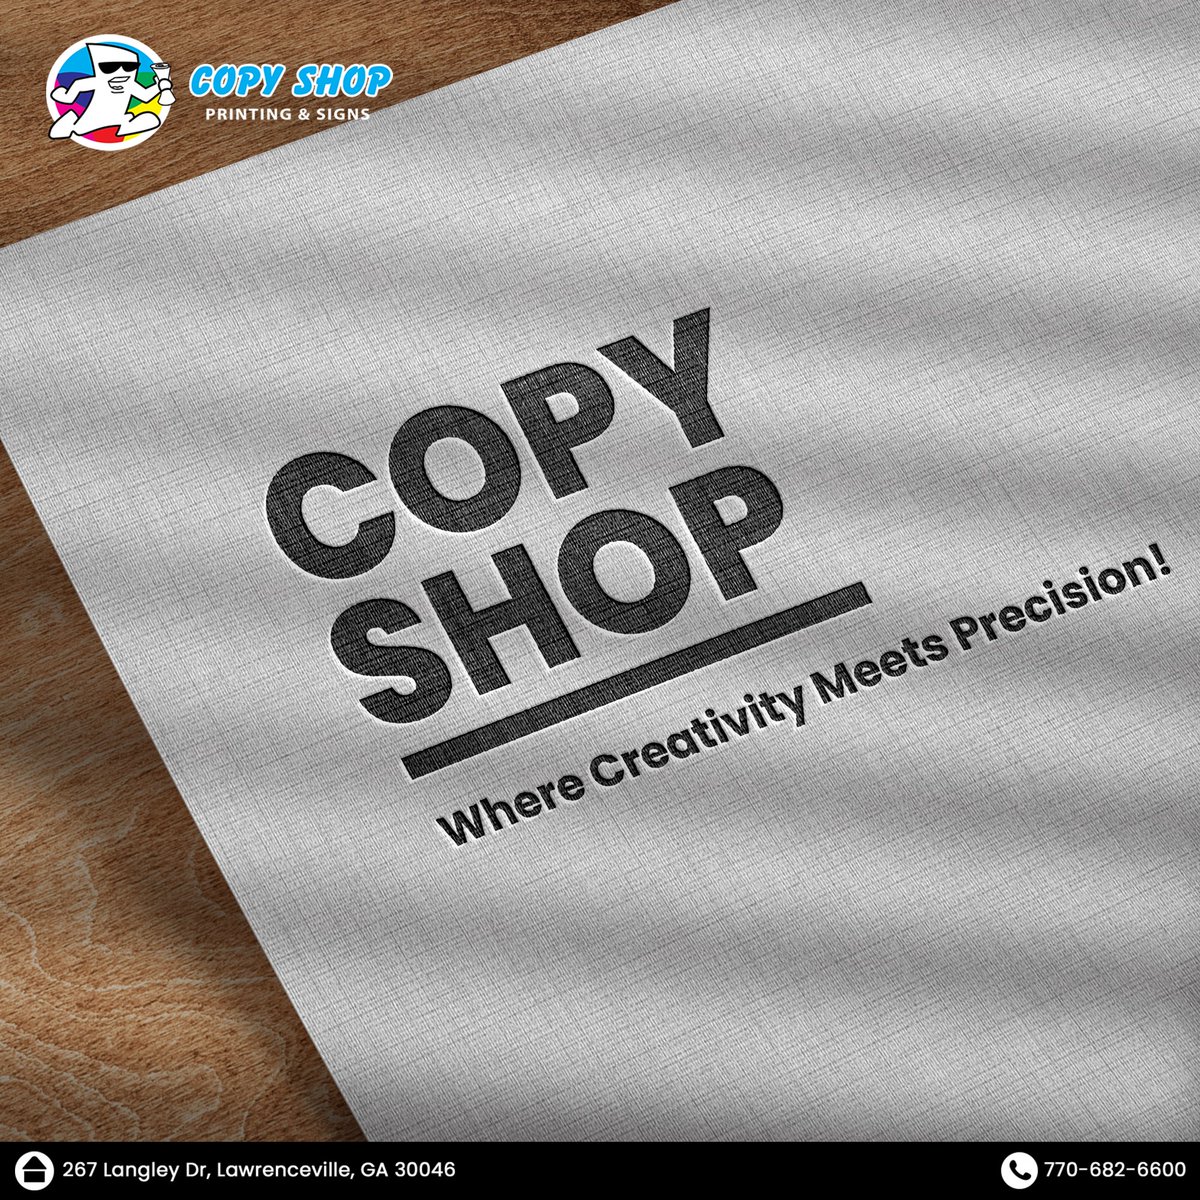 We're not just about ink on paper. We're about fostering a creative community where ideas flourish and dreams become reality.
.
.
#copyshop #copyshopprinting #printing #designing #doortag #printingservices #design #designer #printshop #shirtprinting #WednesdayMotivation